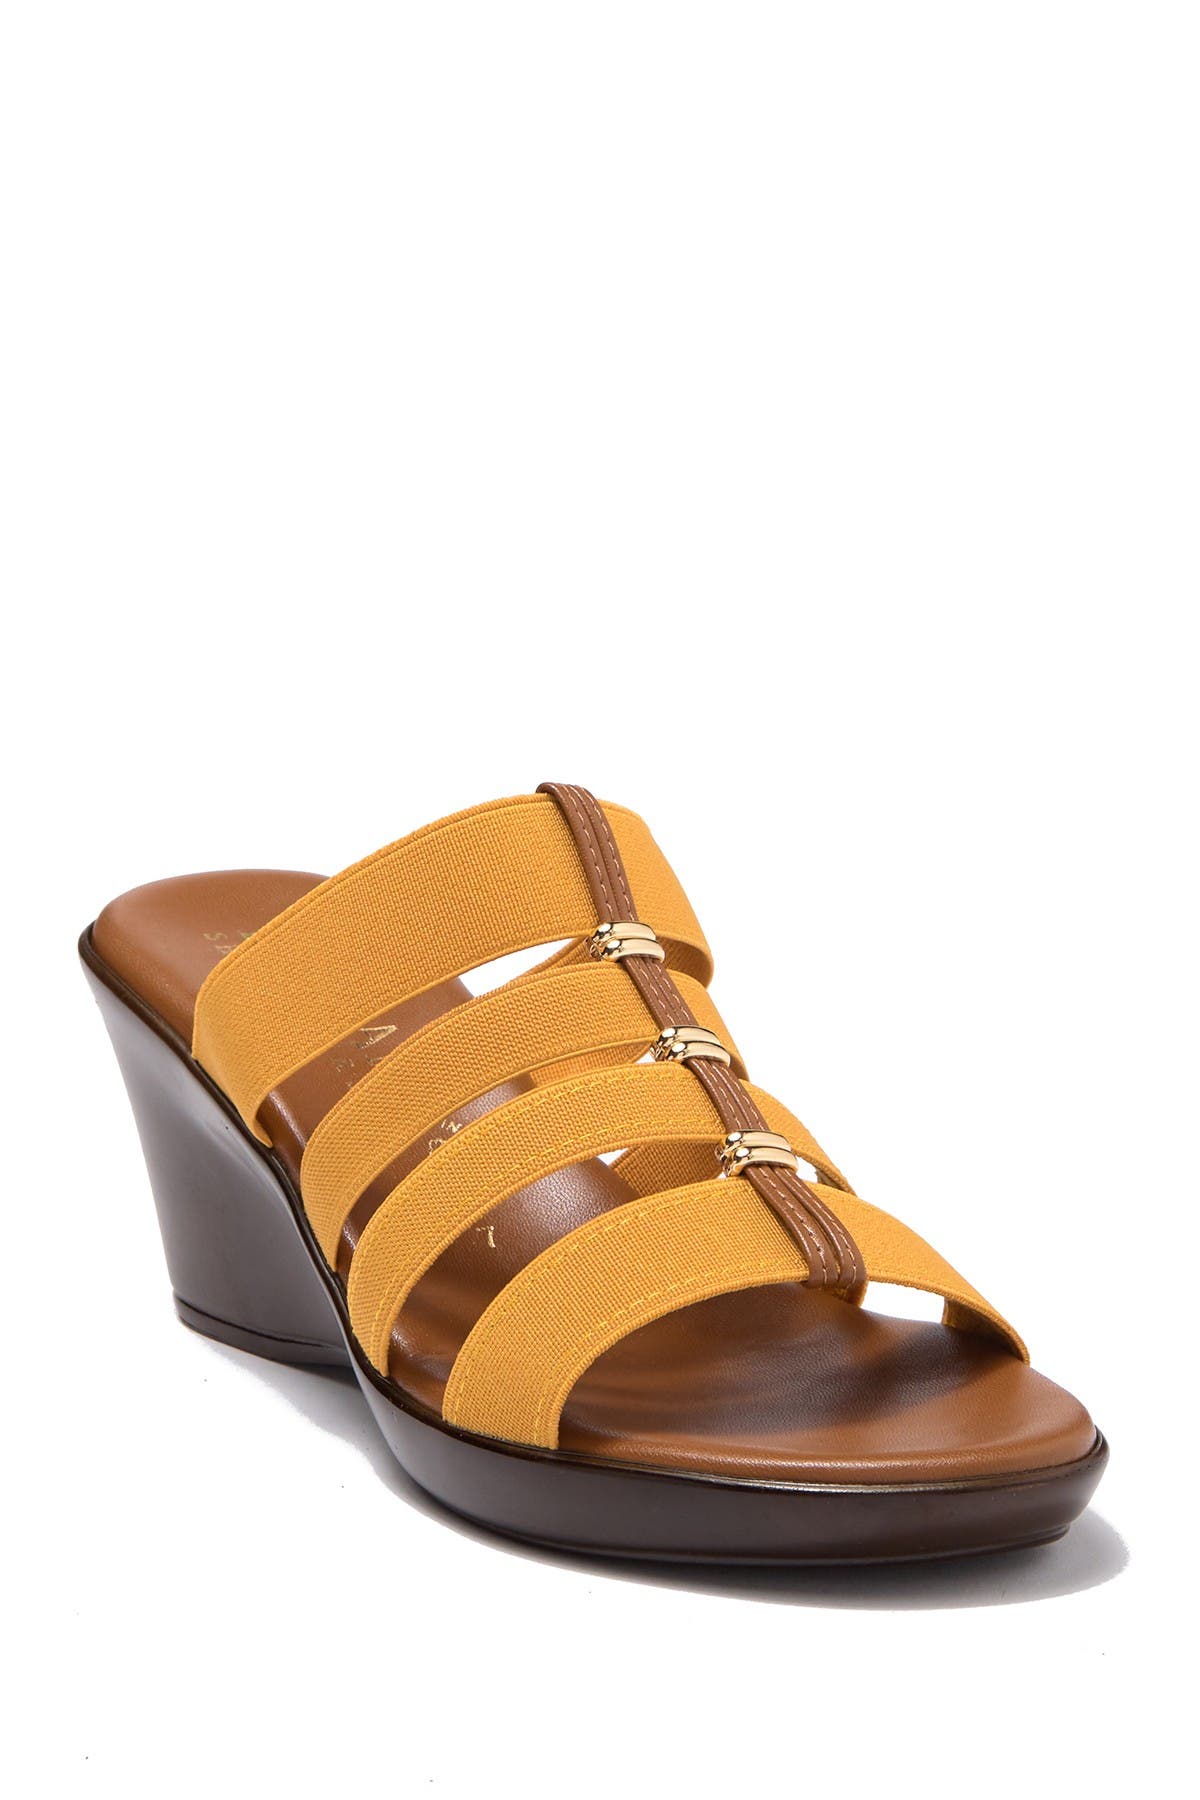 Italian Shoemakers Clover 4-band Wedge Sandal In Mustard